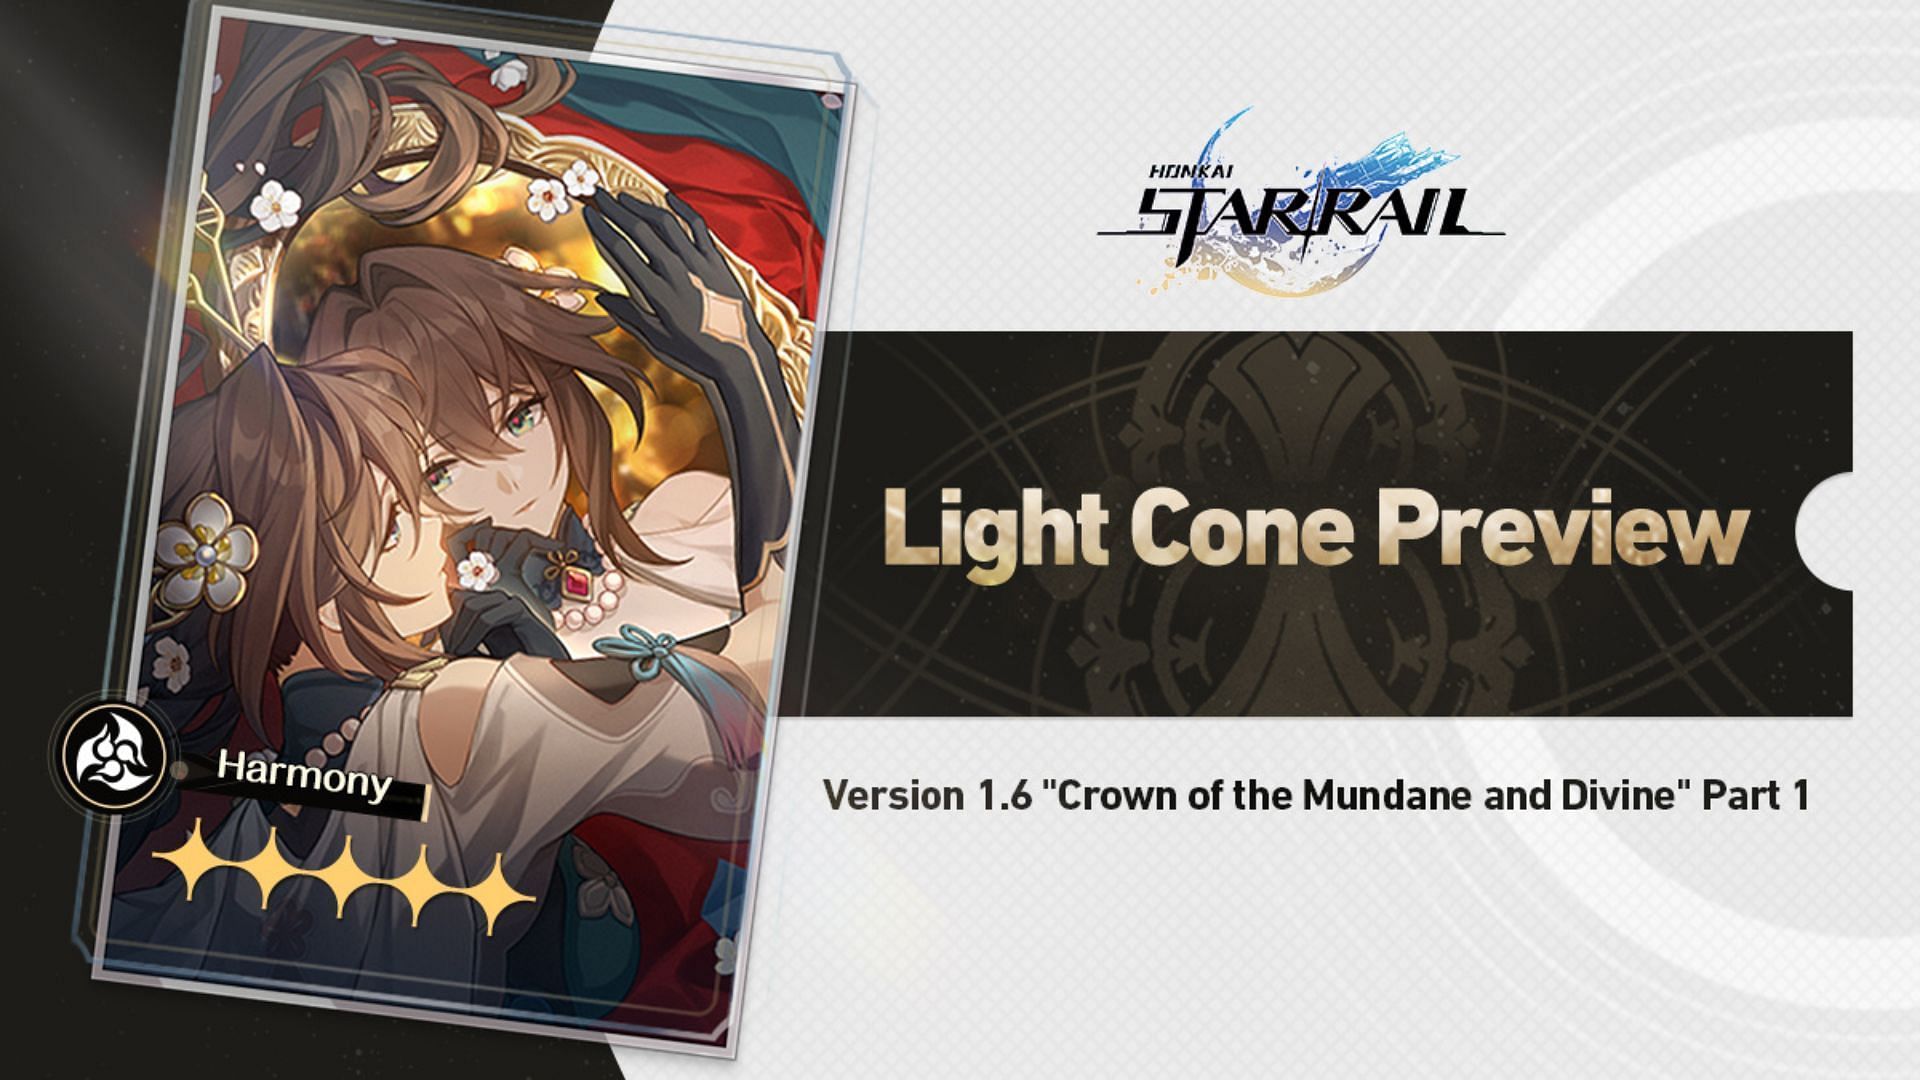 The official artwork for Honkai Star Rail 1.6 Light Cone preview 